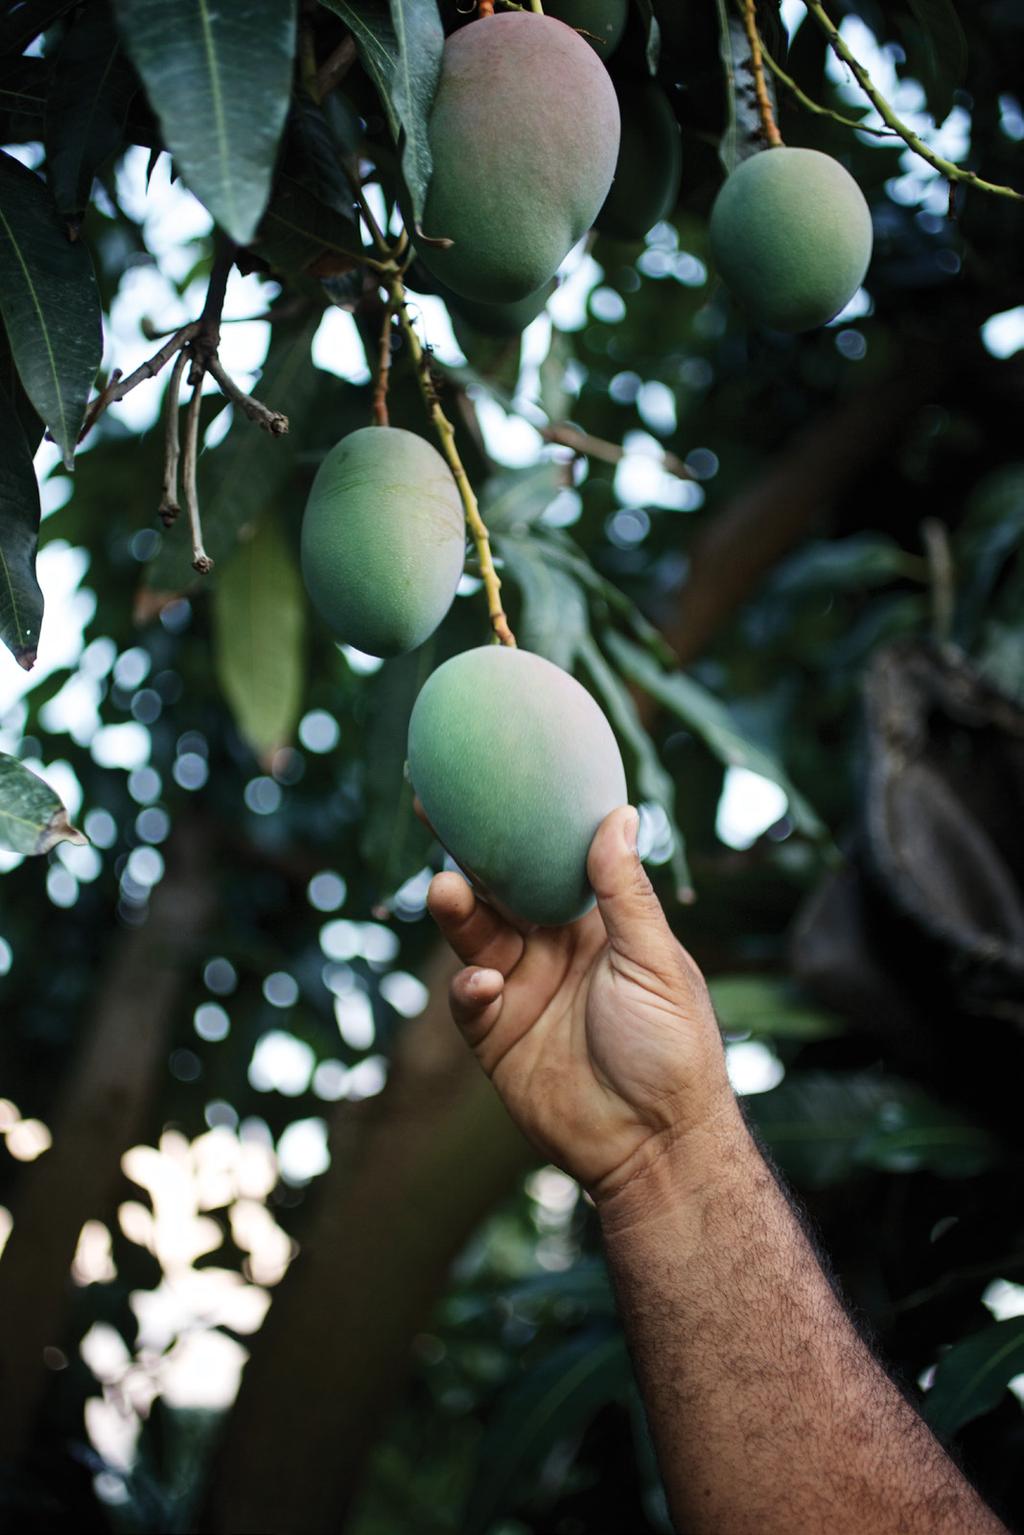 Share. Mango. Love. The passion and craft of growing and harvesting mangos At what point does a fruit become a cultural icon?